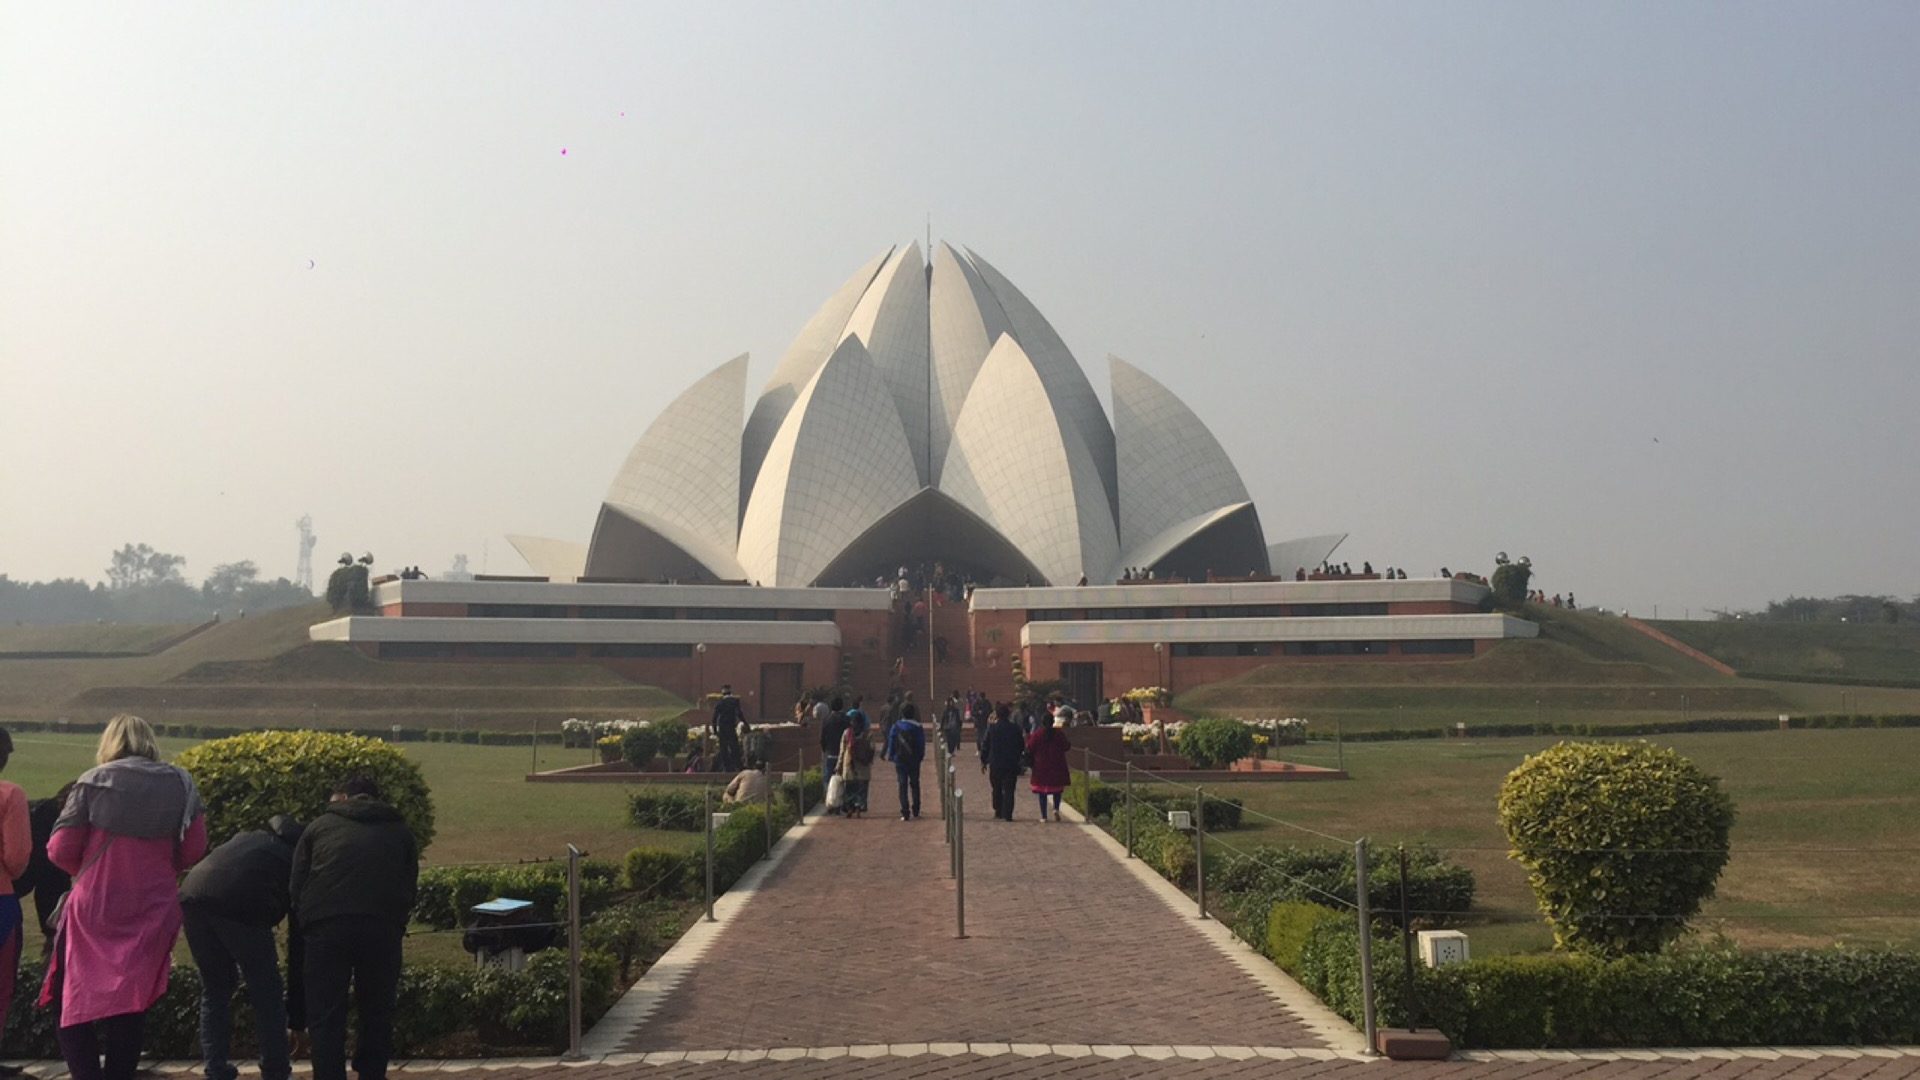 Lotus temple in India. India reflection